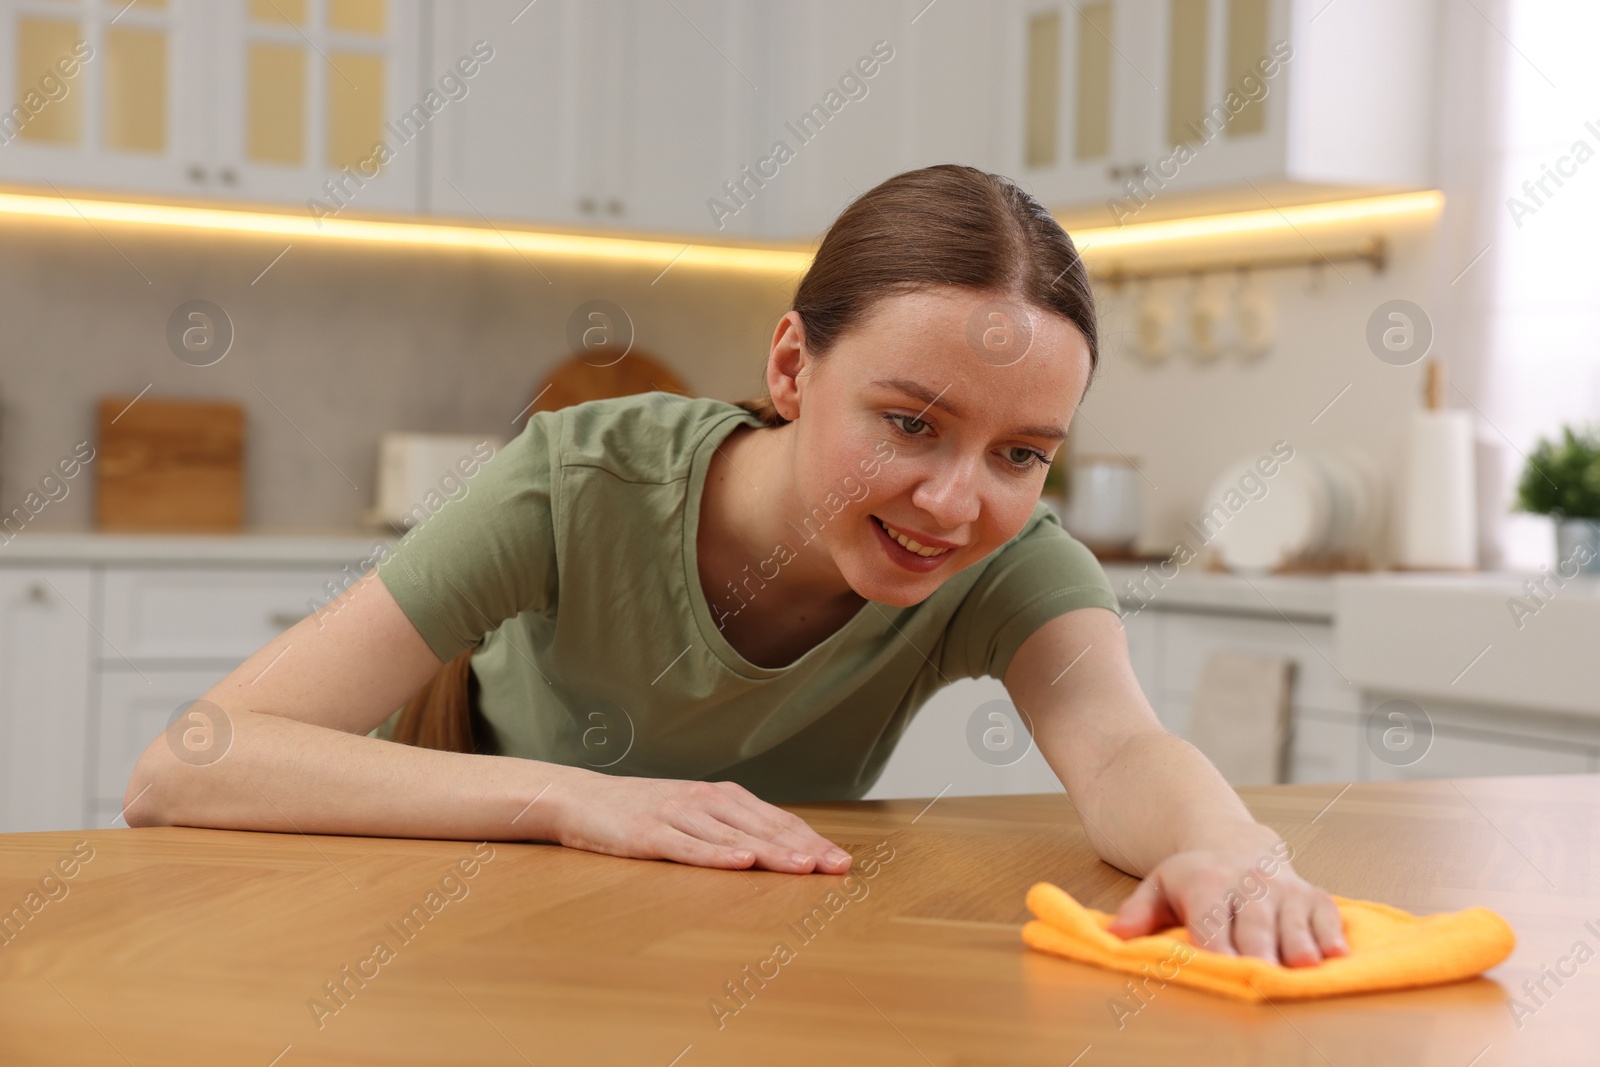 Photo of Woman with microfiber cloth cleaning wooden table in kitchen